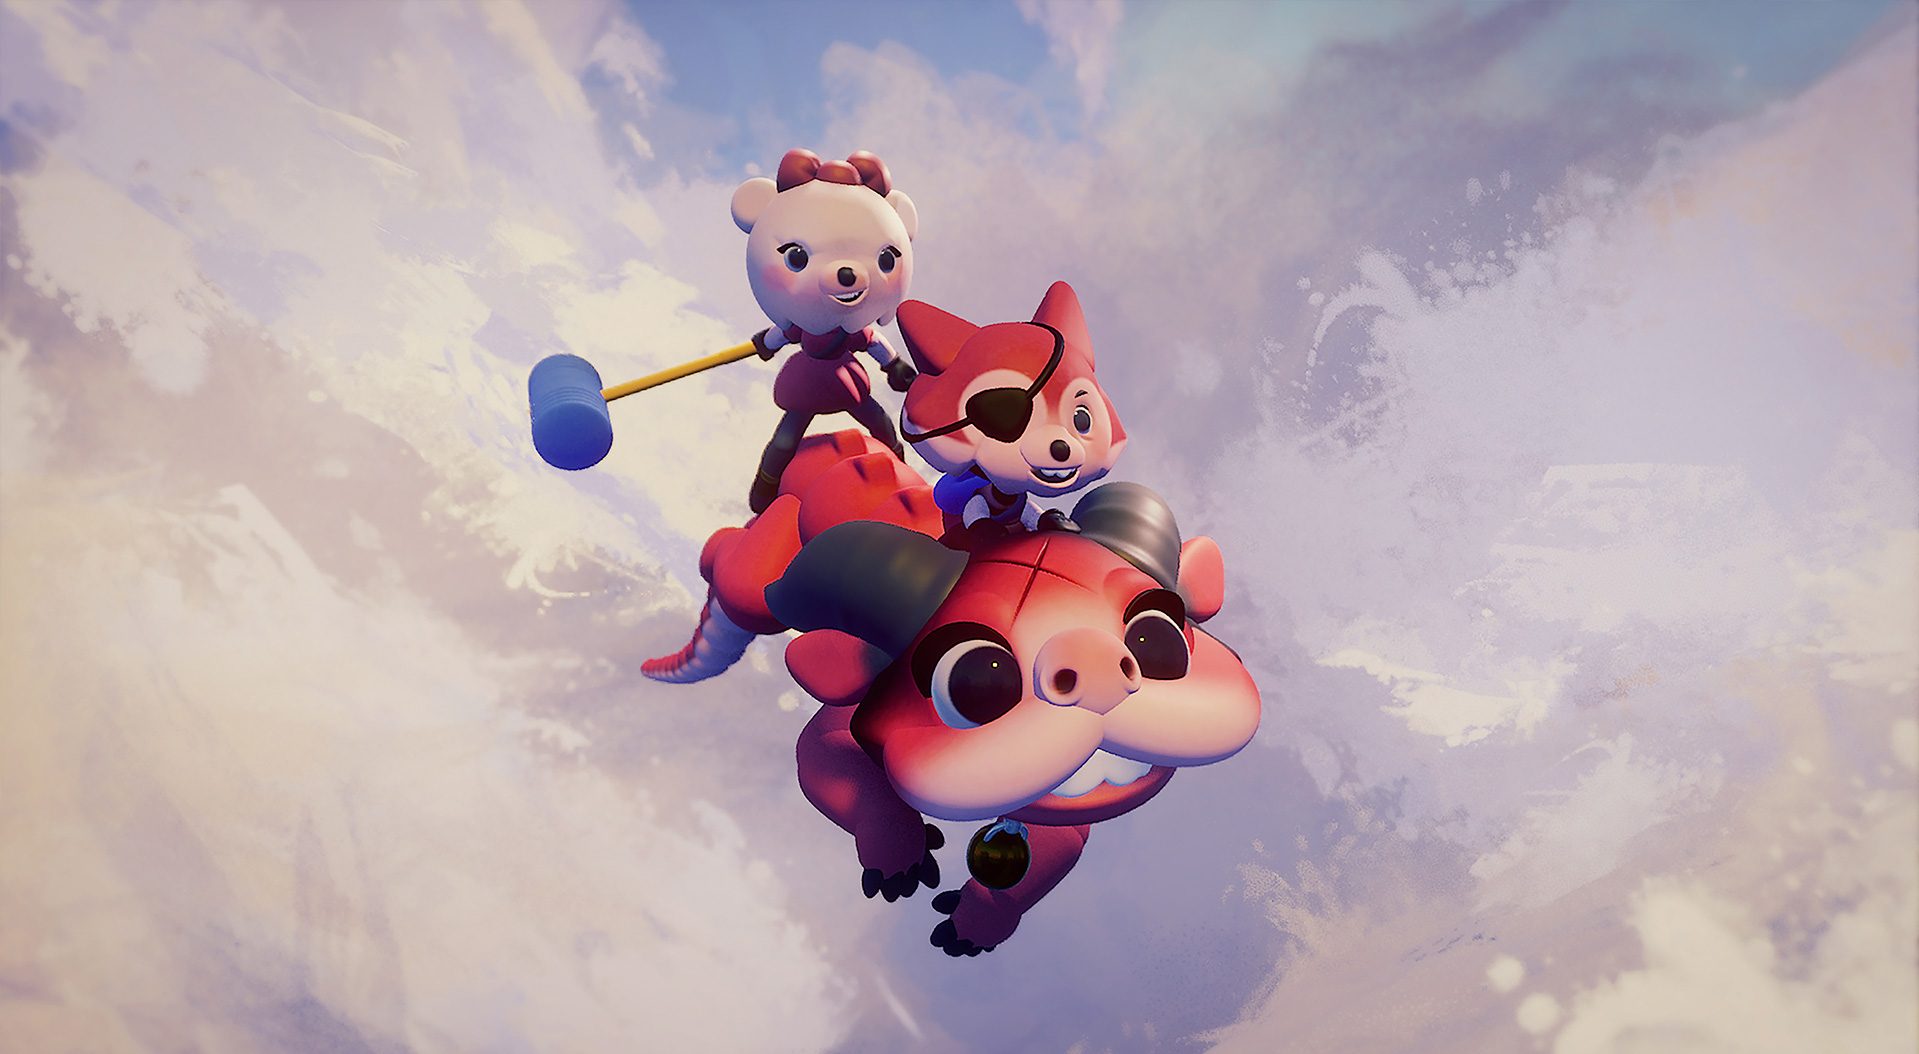 Characters from Media Molecule's Dreams riding a dragon in the clouds